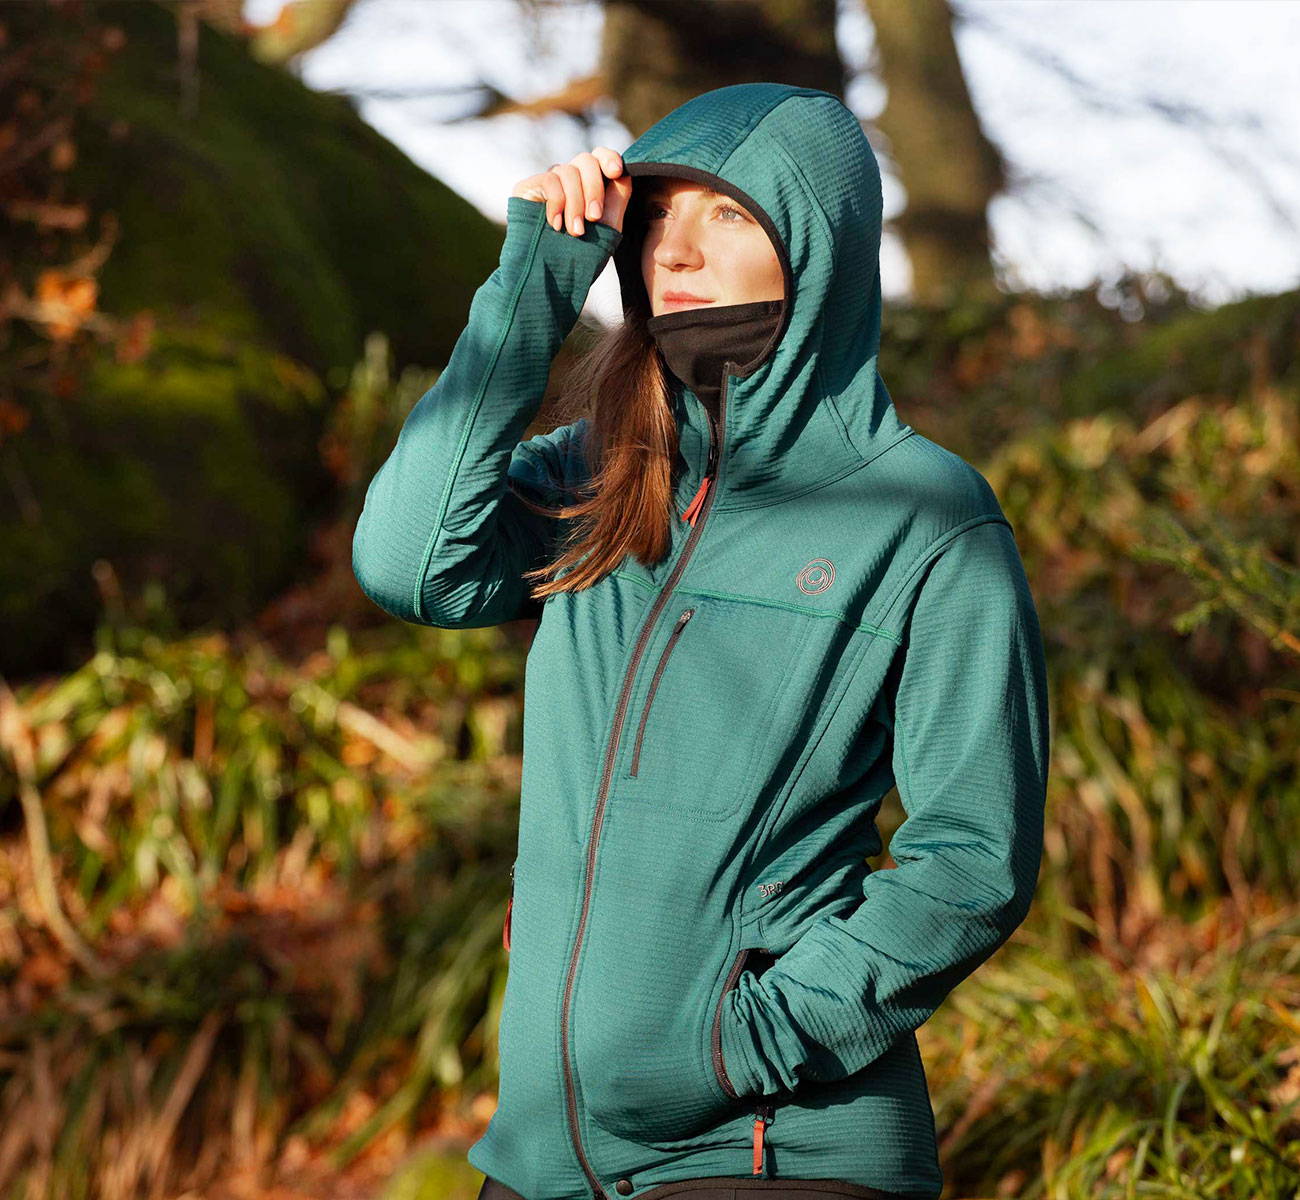 Our model Emma, wearing the reach with the hood up and the bugg over her chin for extram warmth.